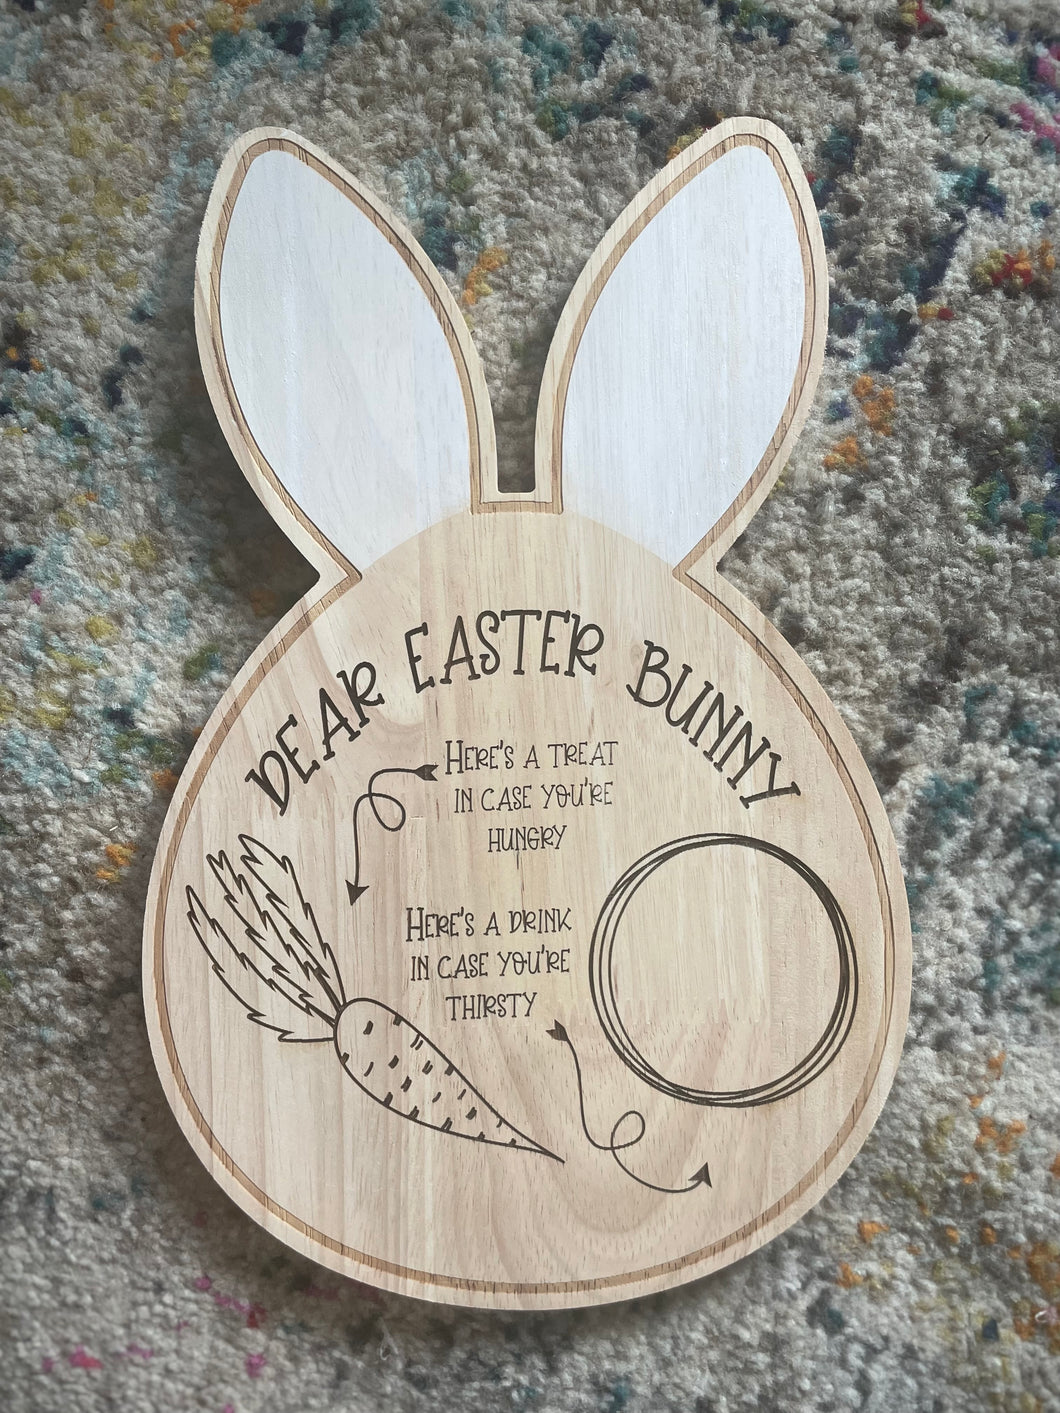 Easter Bunny Serving Tray, Plate, Treats, Carrots, Drink